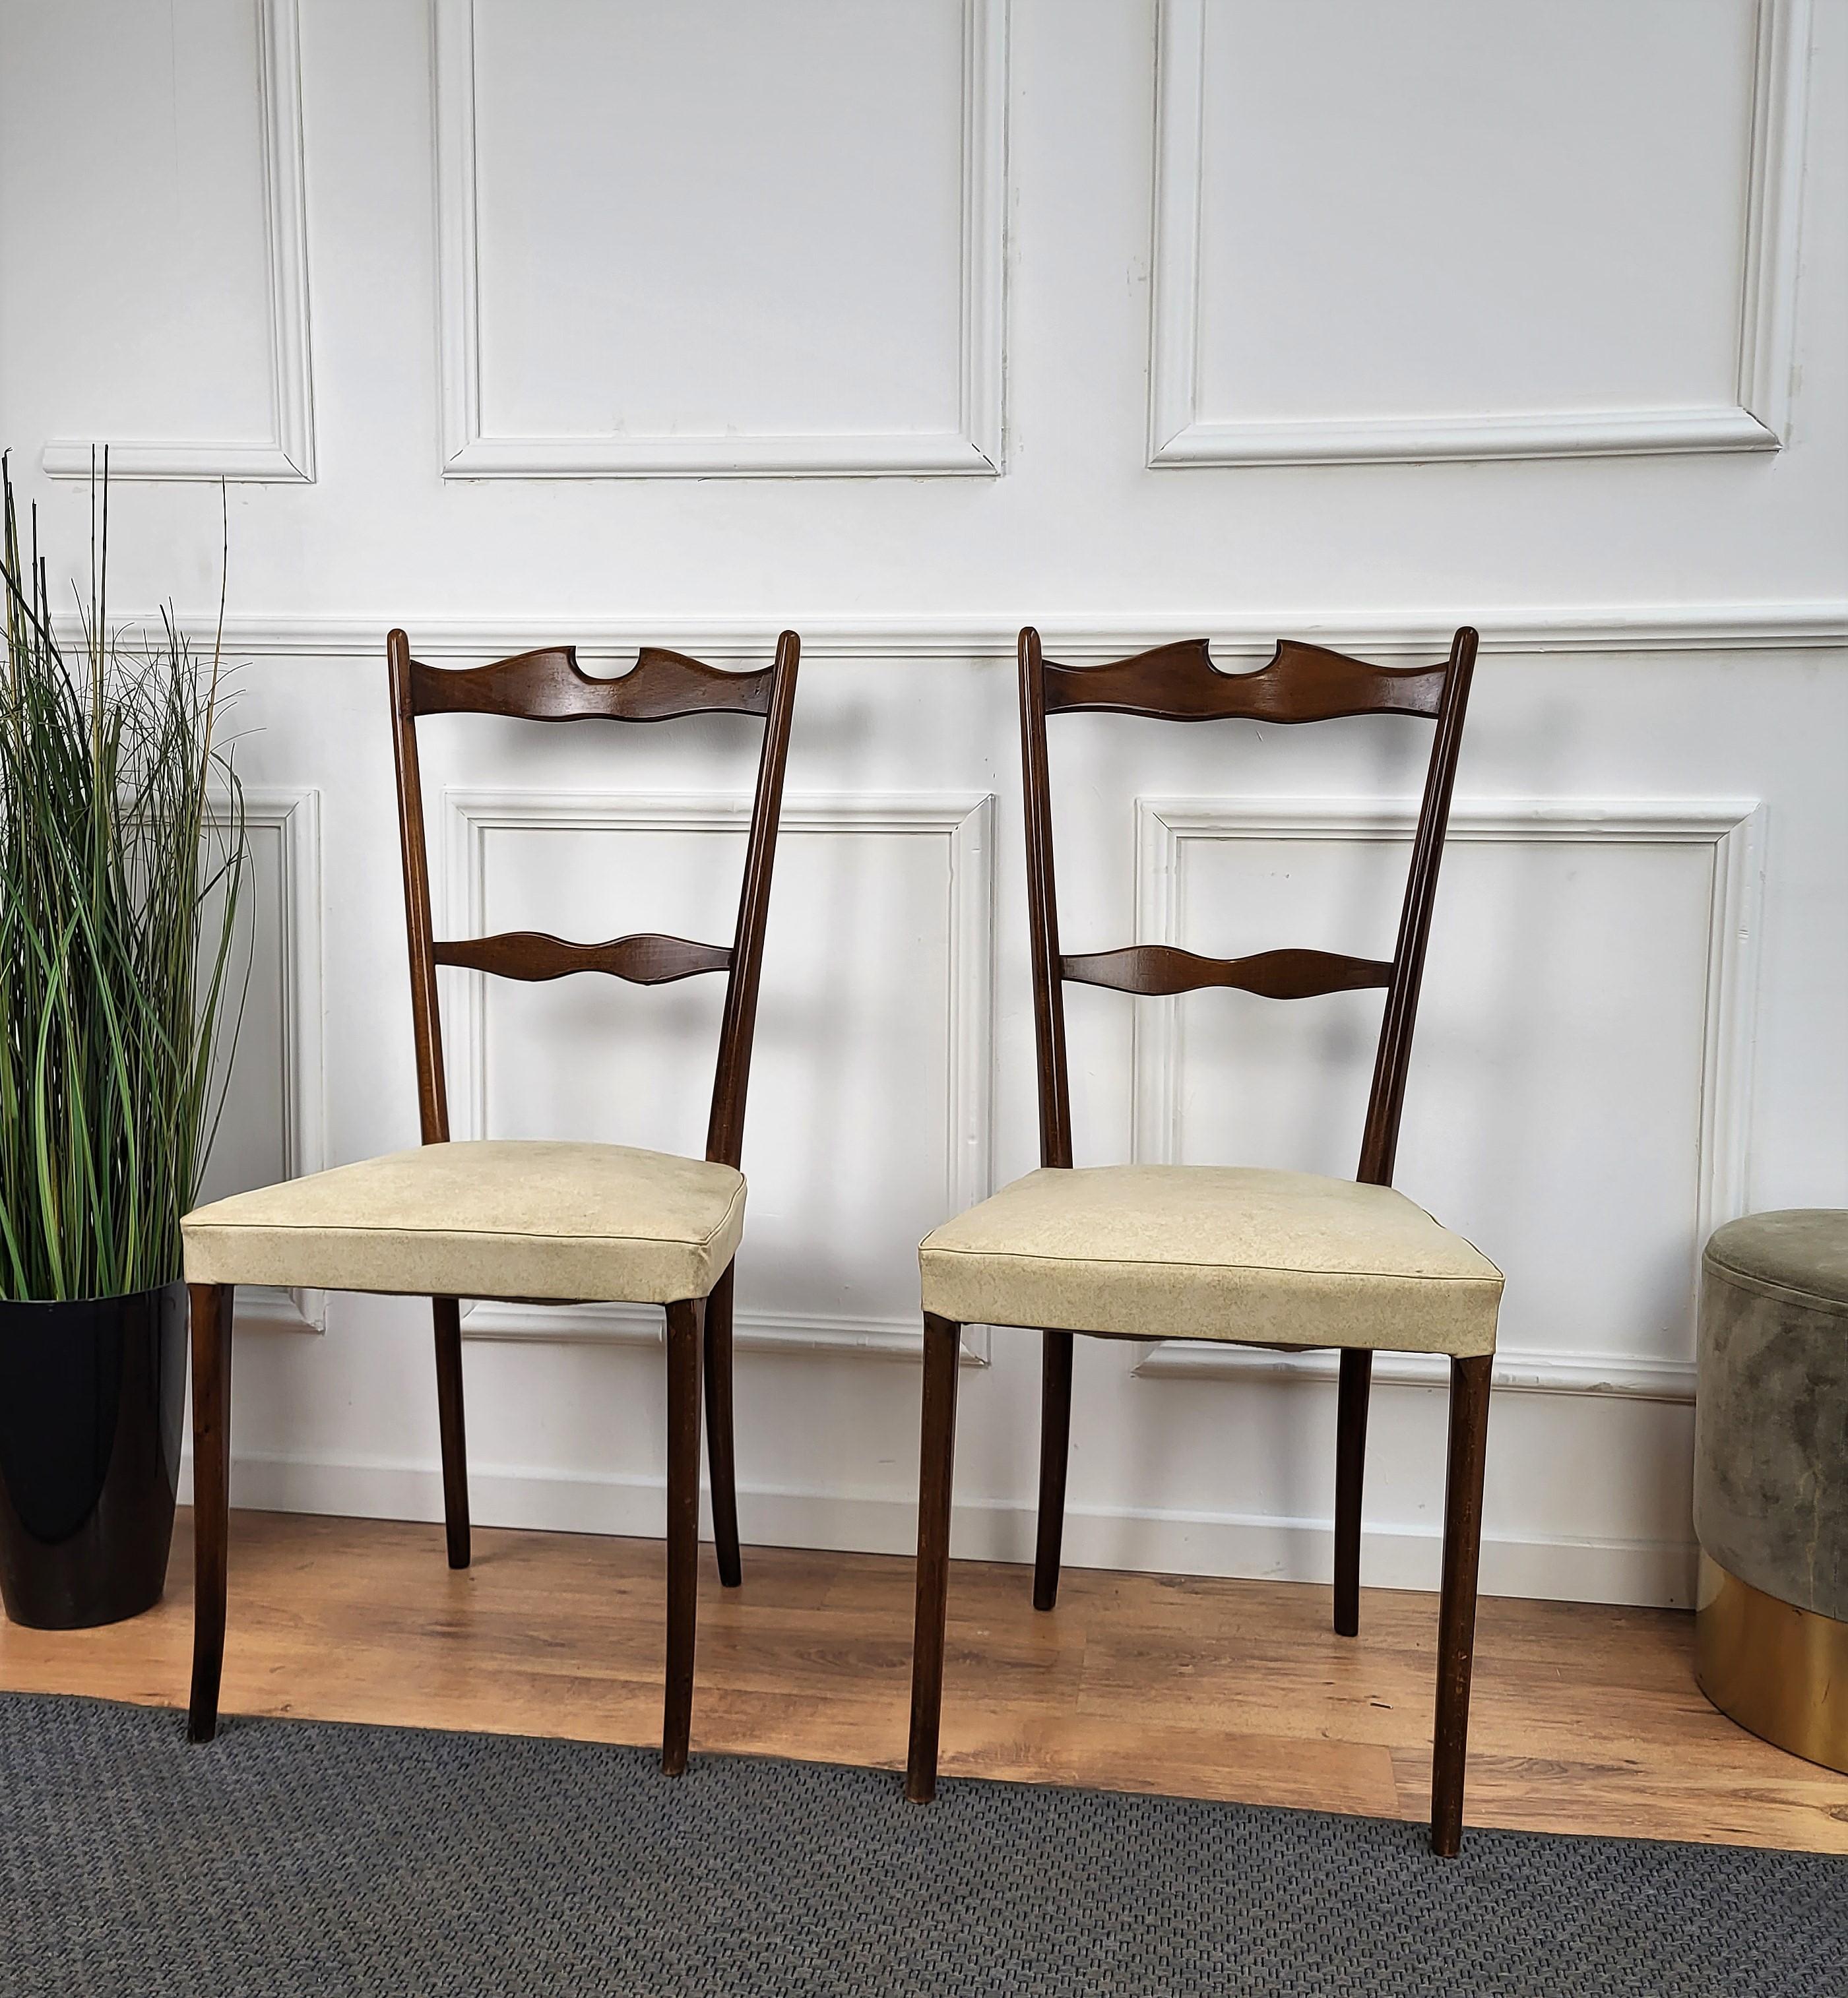 Set of 6 Mid-Century Modern Italian Walnut Wood Upholstered Dining Chairs In Good Condition For Sale In Carimate, Como